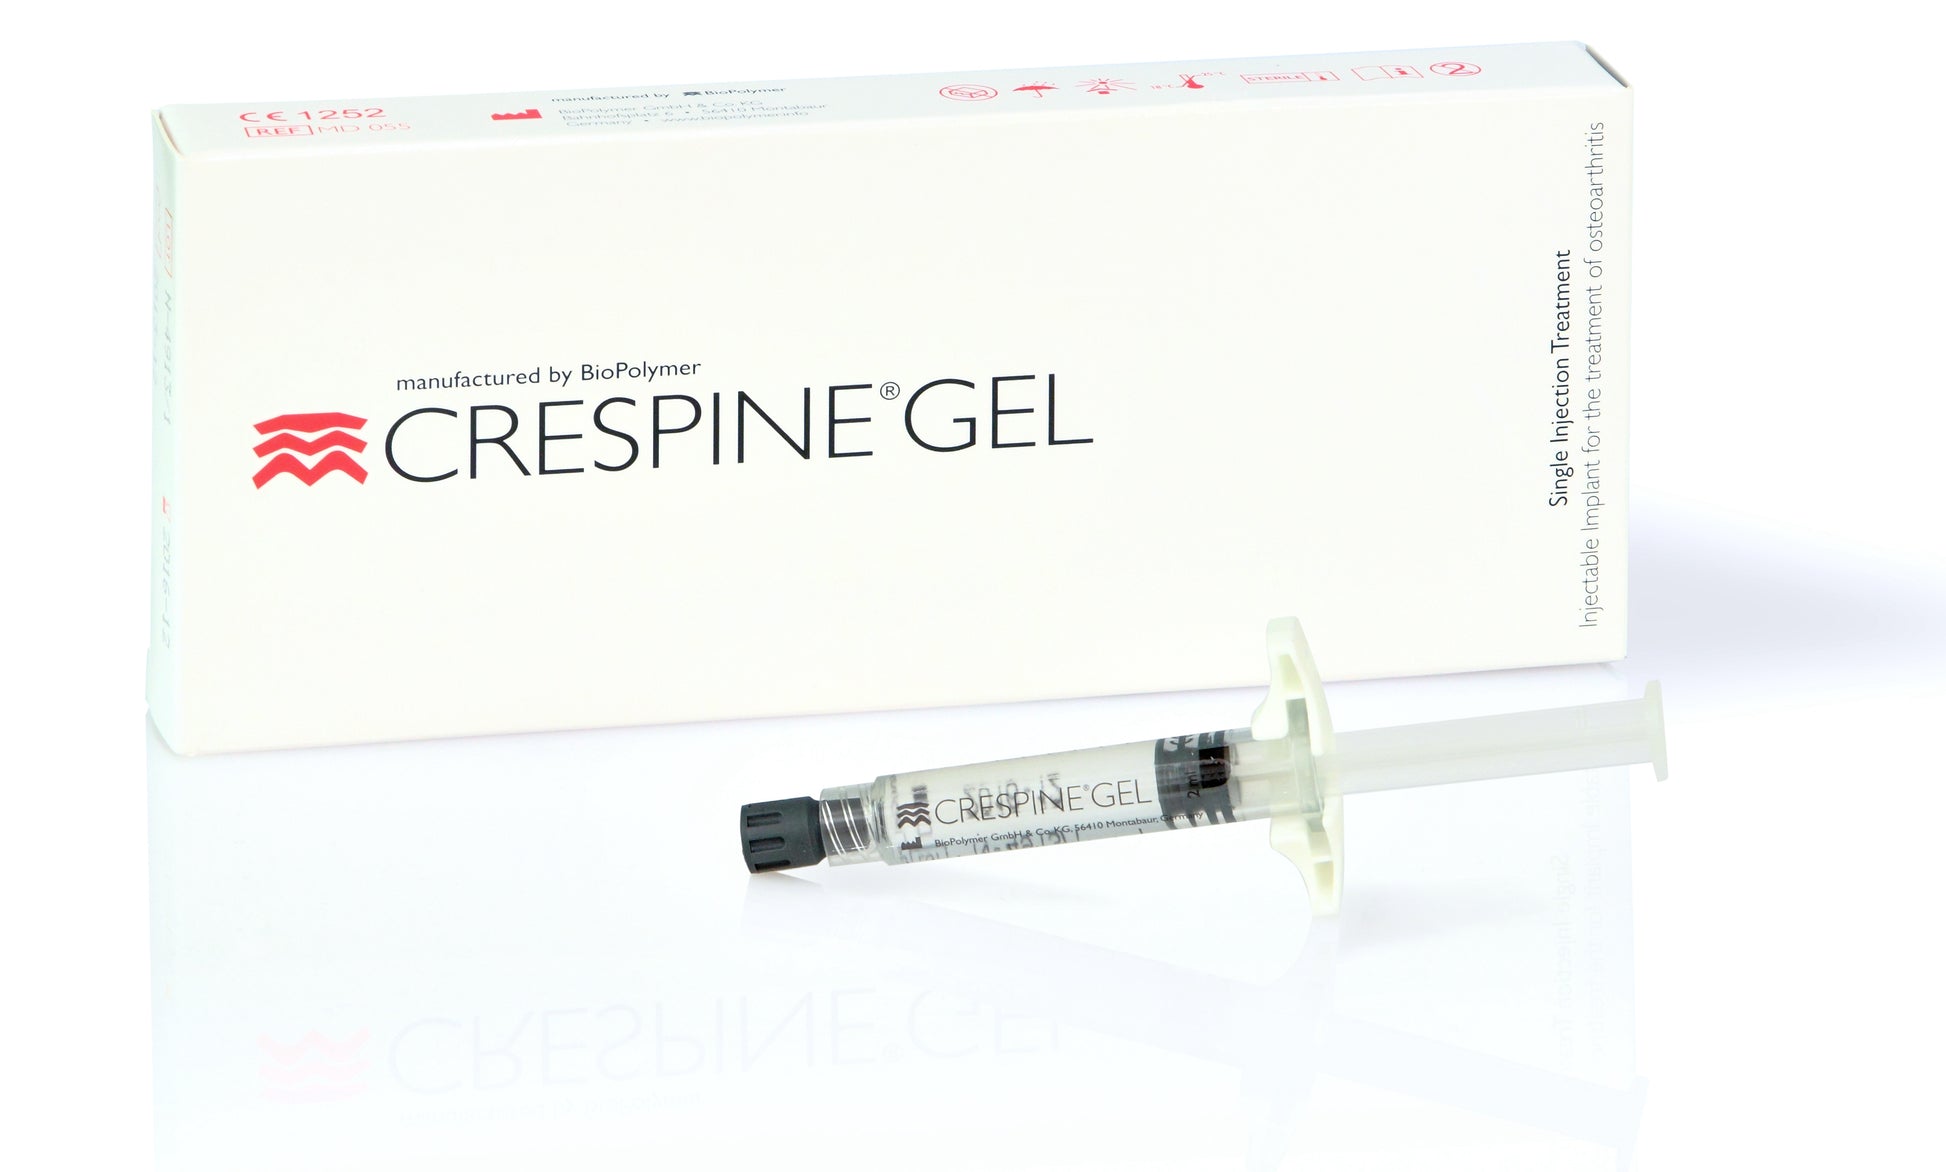 Crespine Gel with injection, front view